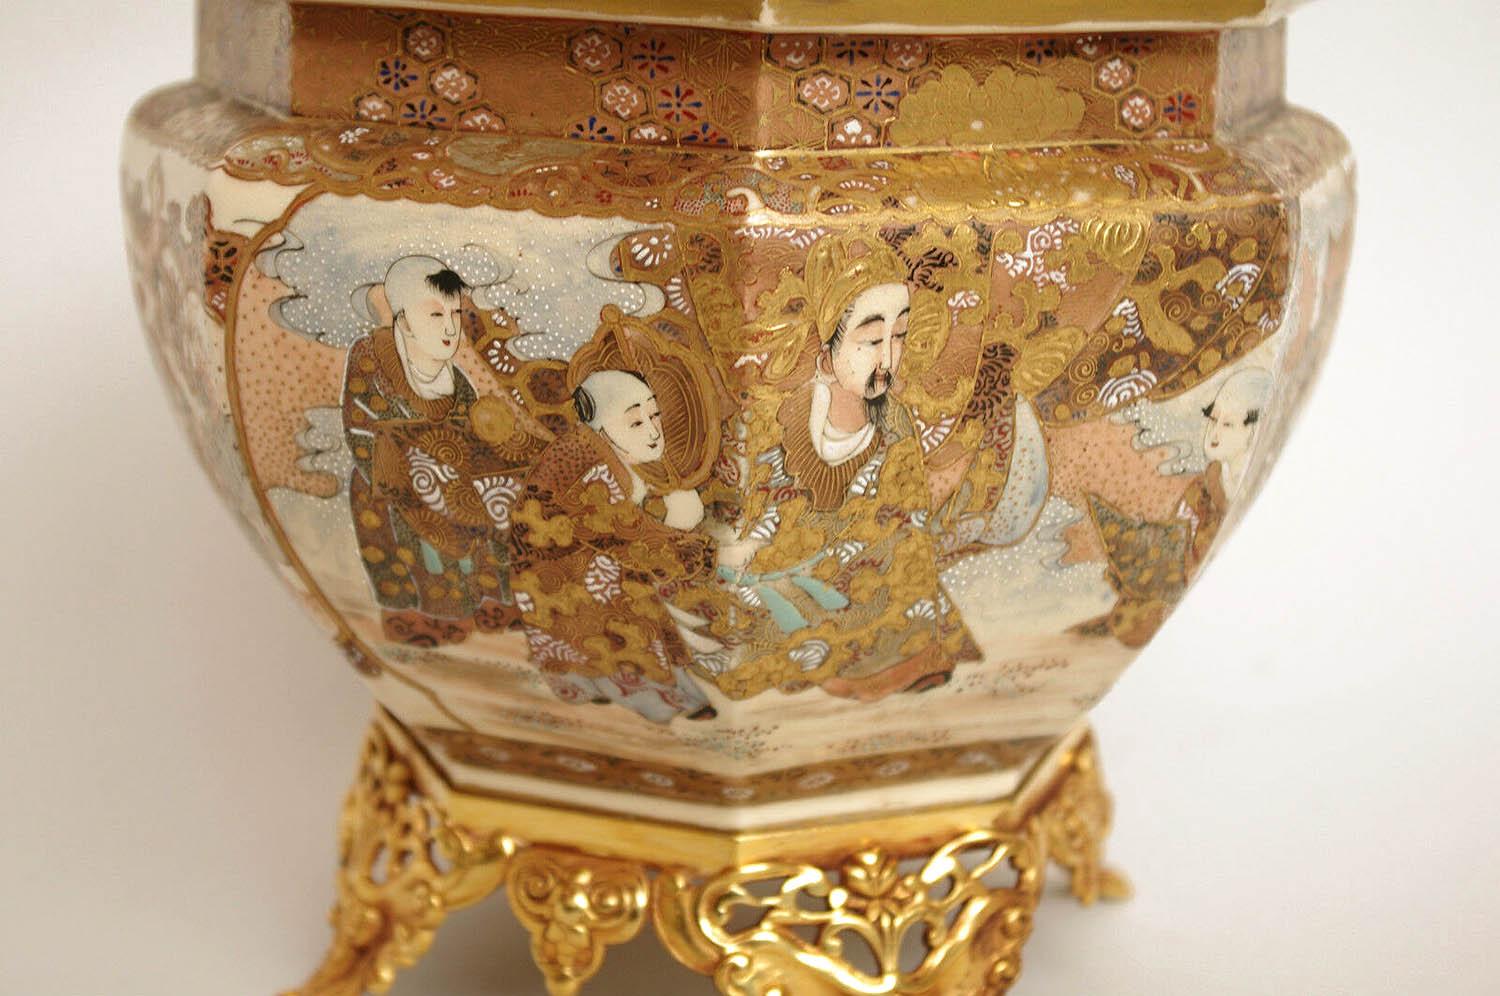 Satsuma ware planter in octagonal jar shape. Decor of polychrome enamels on a white background and gilt highlights figuring two palace scenes in cartouches, surrounded by blue, red and white chrysanthemum. High and low friezes with a geometrical